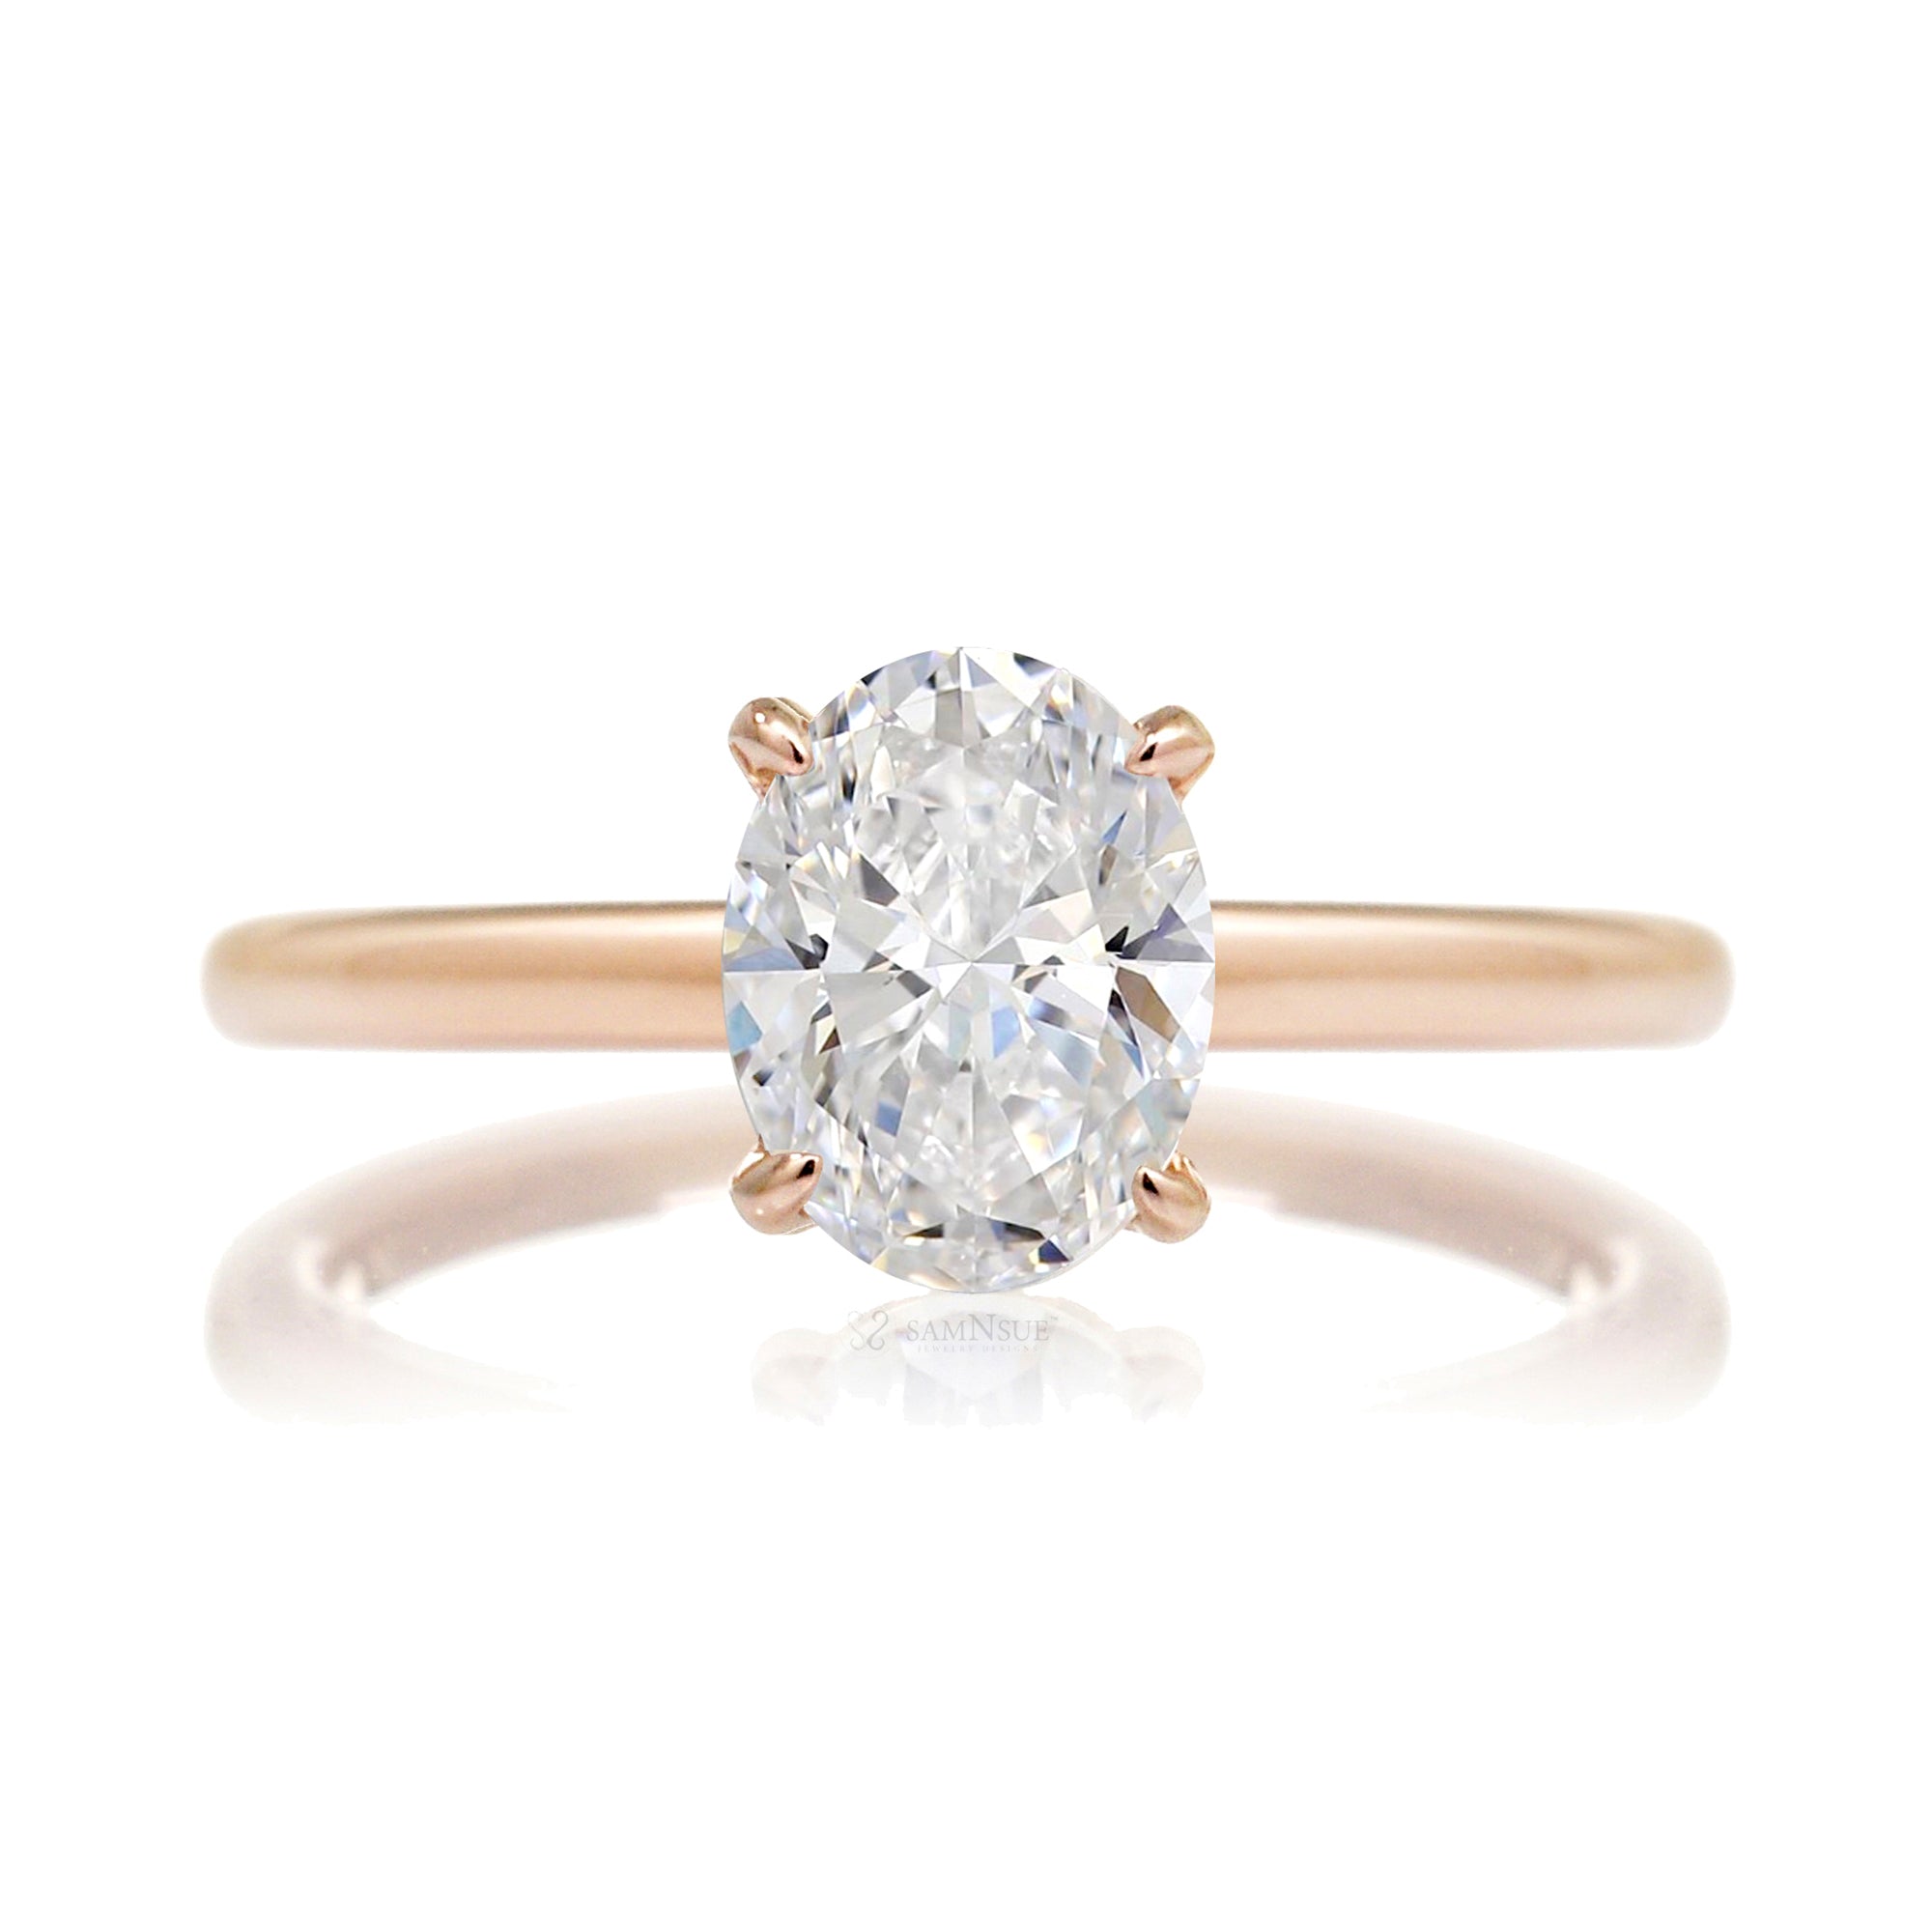 Oval diamond engagement ring solid band hidden halo in rose gold